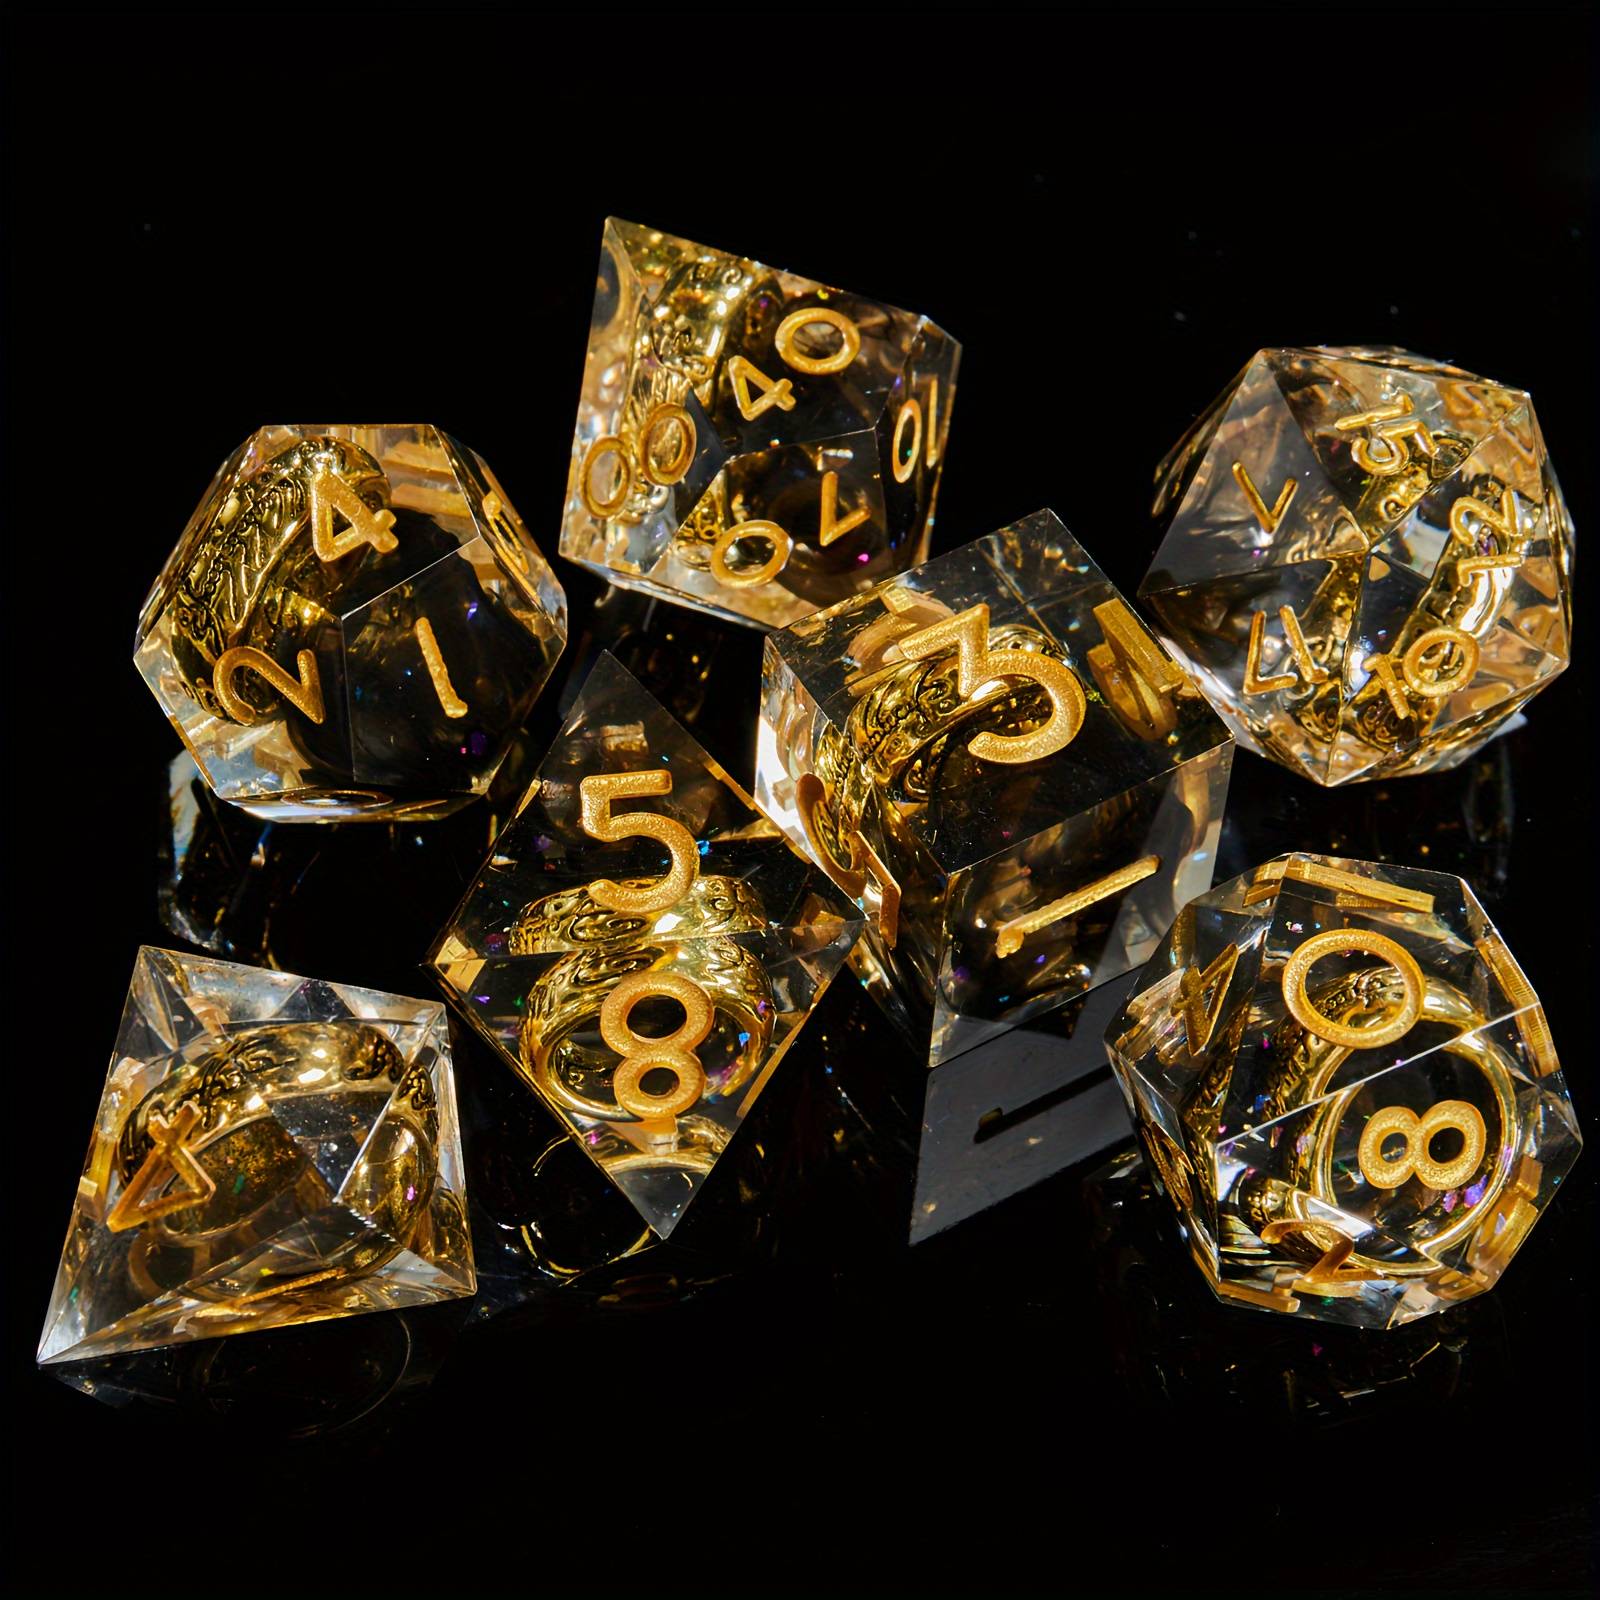 

Semi Transparent Handmade Resin Dice, Dnd Role-playing Dice, 7 Polyhedral Dice D&d, Suitable For Rpg Games Of Dragons And Dungeon Explorers